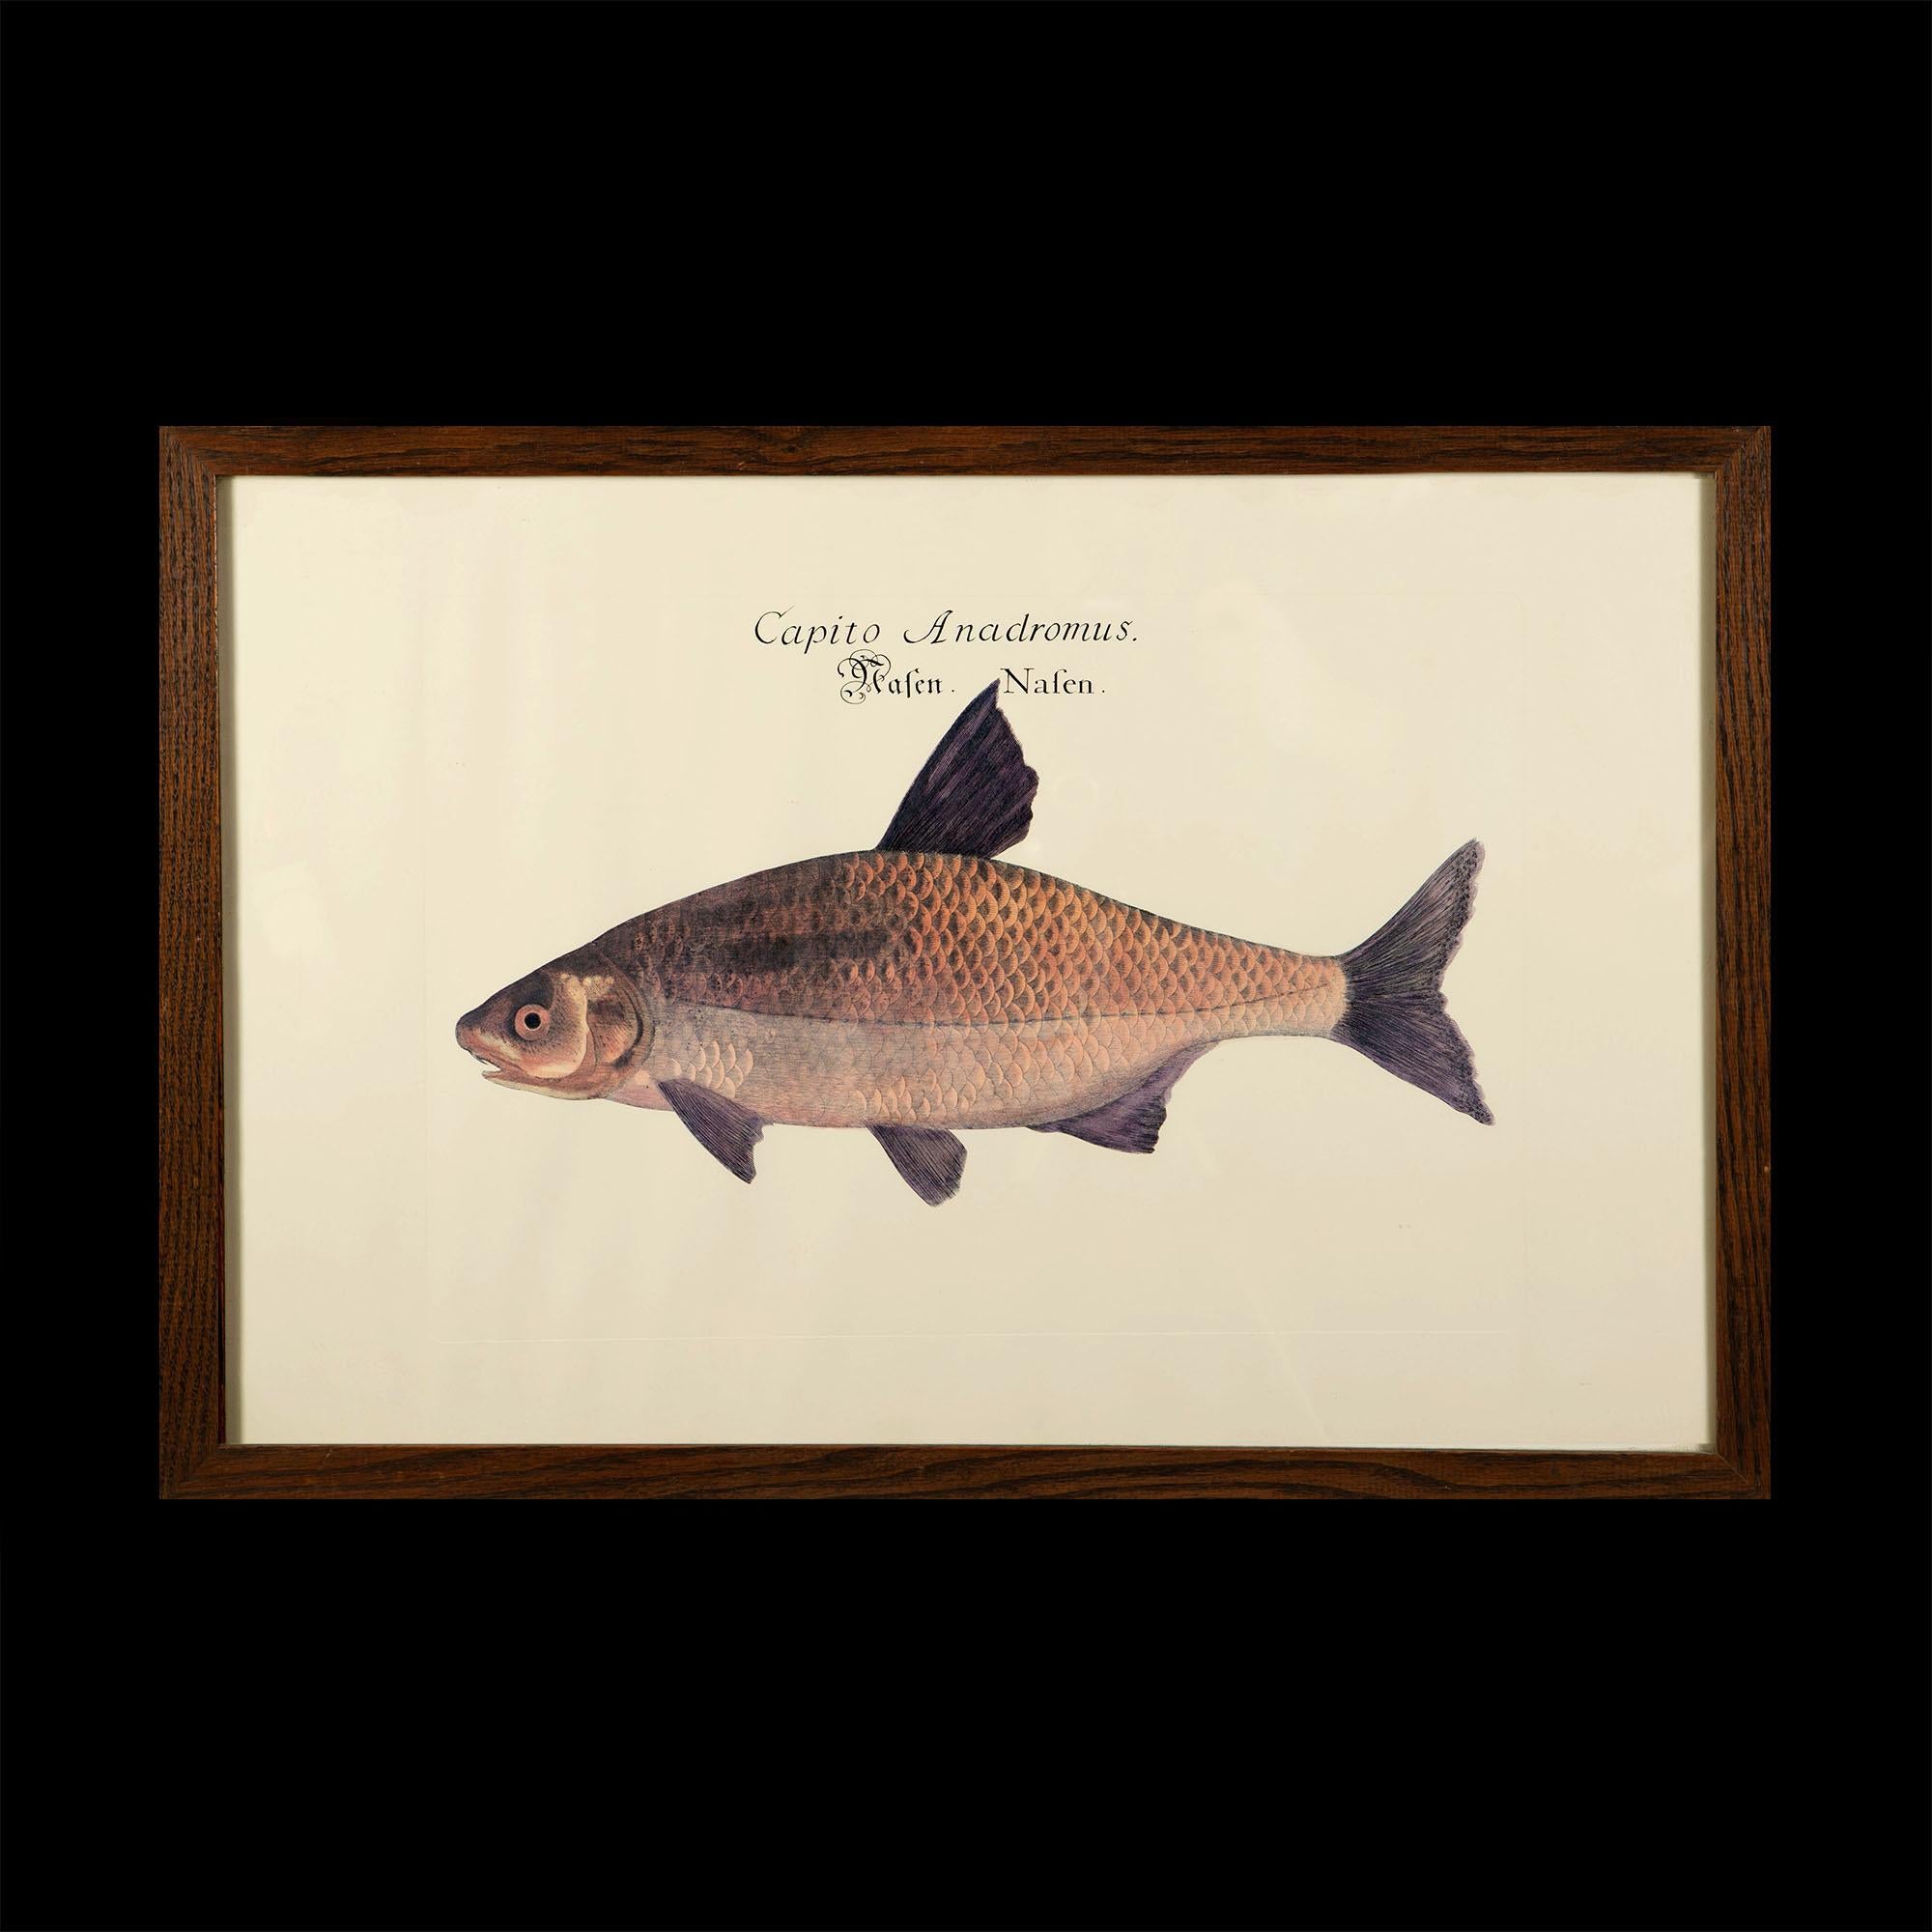 A set of four late 19th century hand colored prints of fish, including carp and salmon, with polished oak frames.